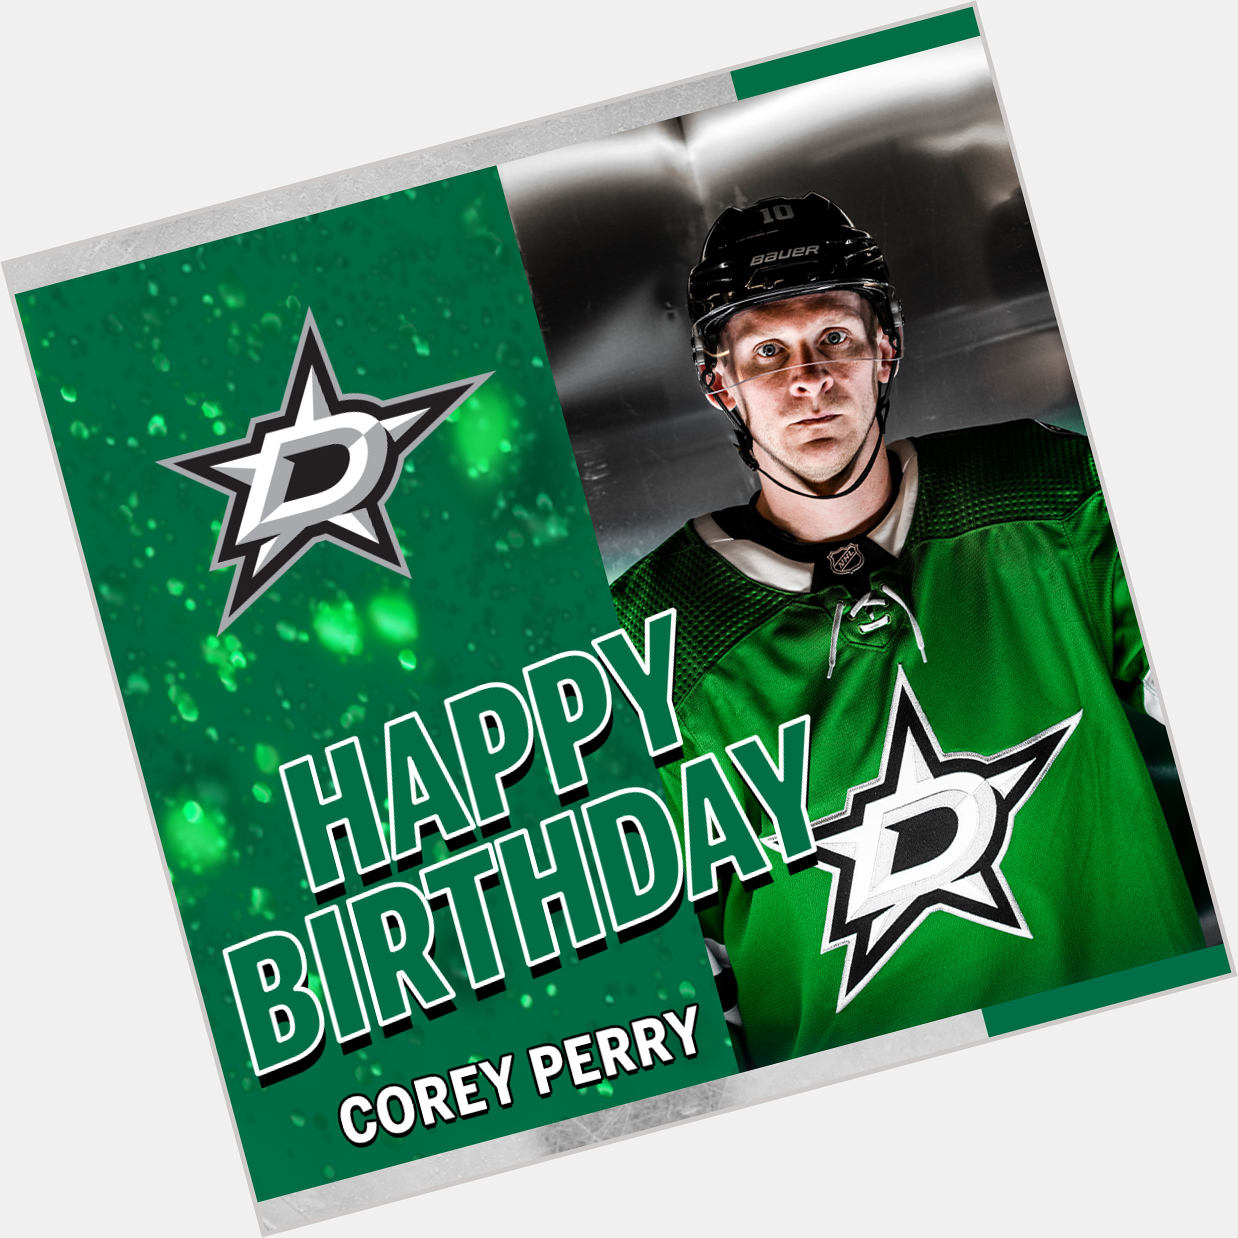 No. 10 takes on the big 3  5  !

A big happy 35th birthday goes out to Corey Perry!  | 